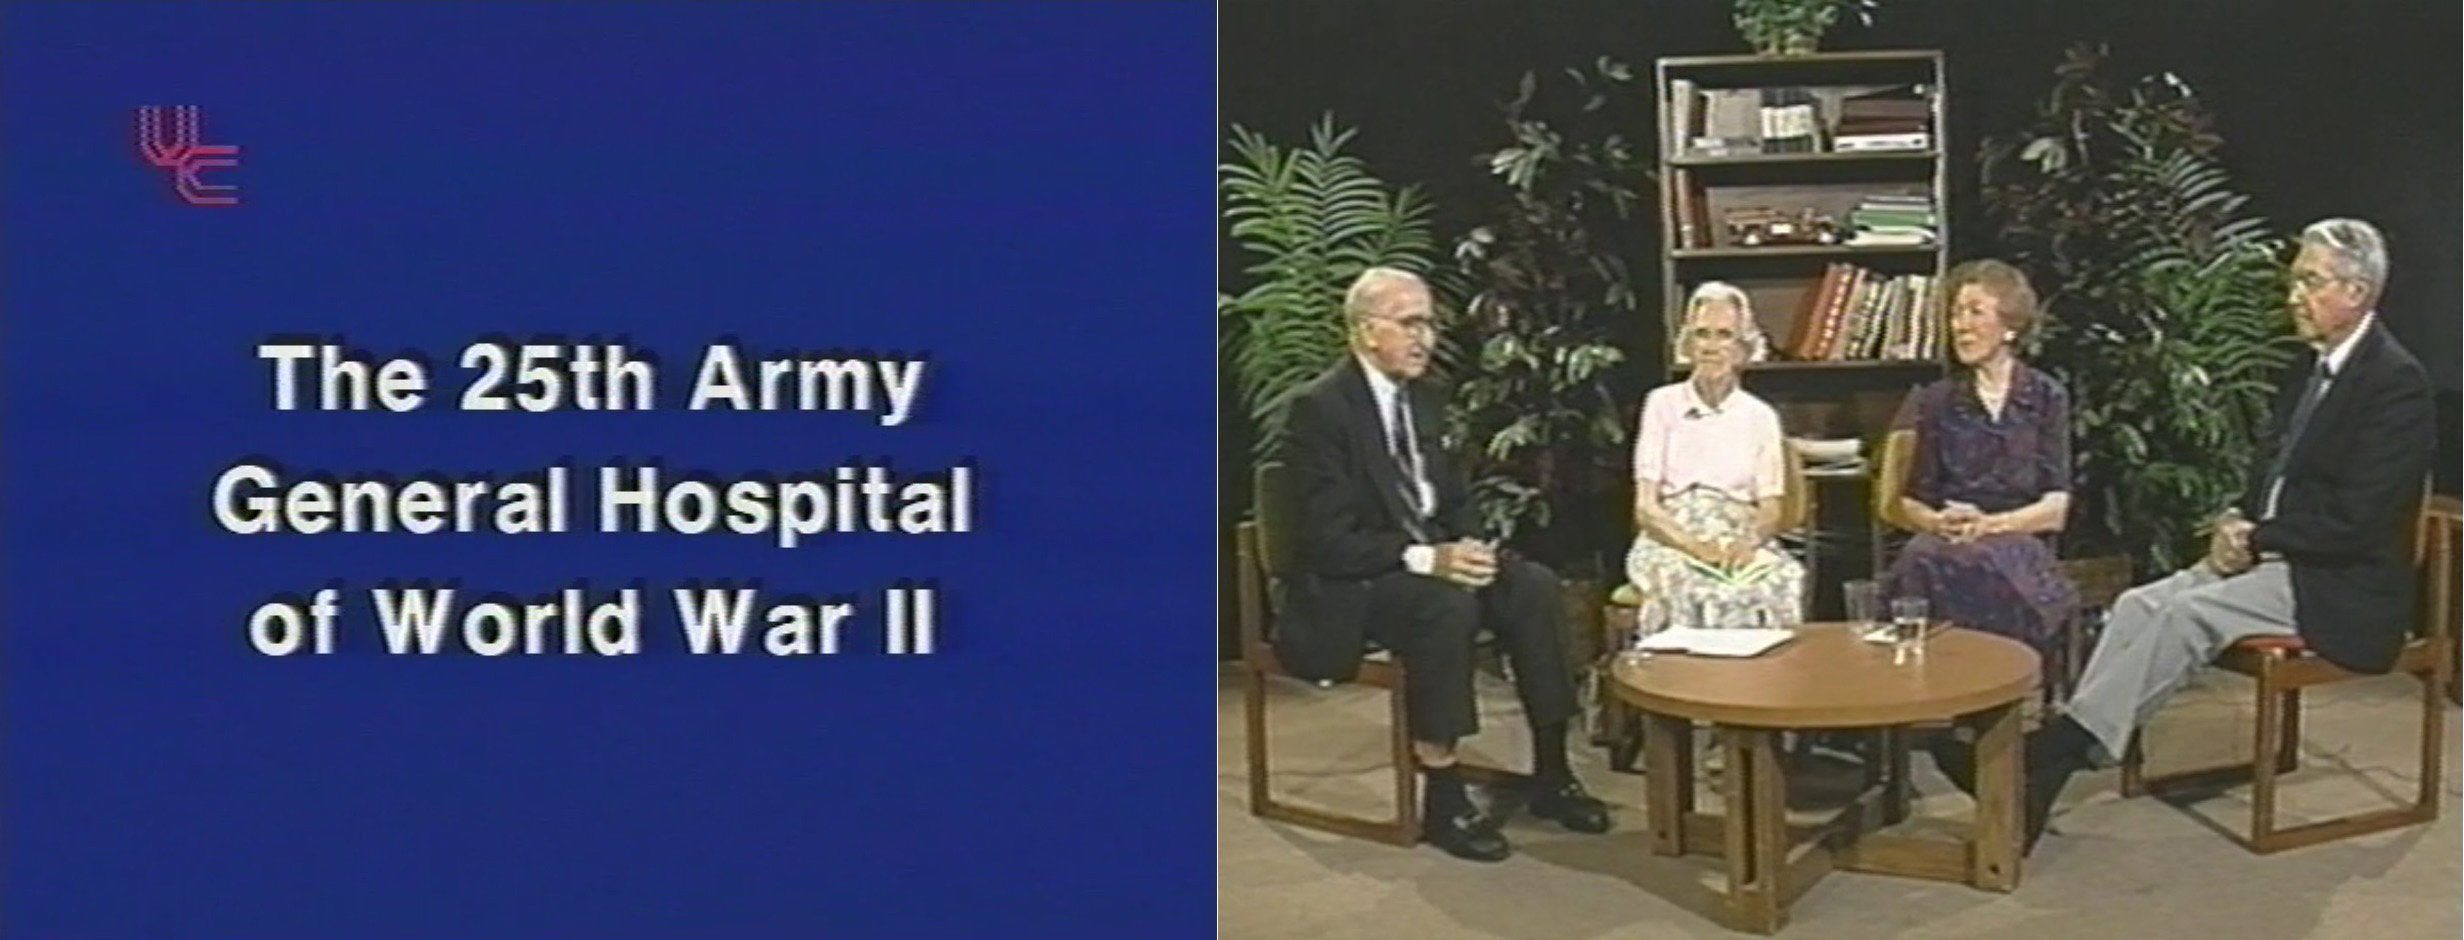 screenshot of title screen of 25th oral history edited